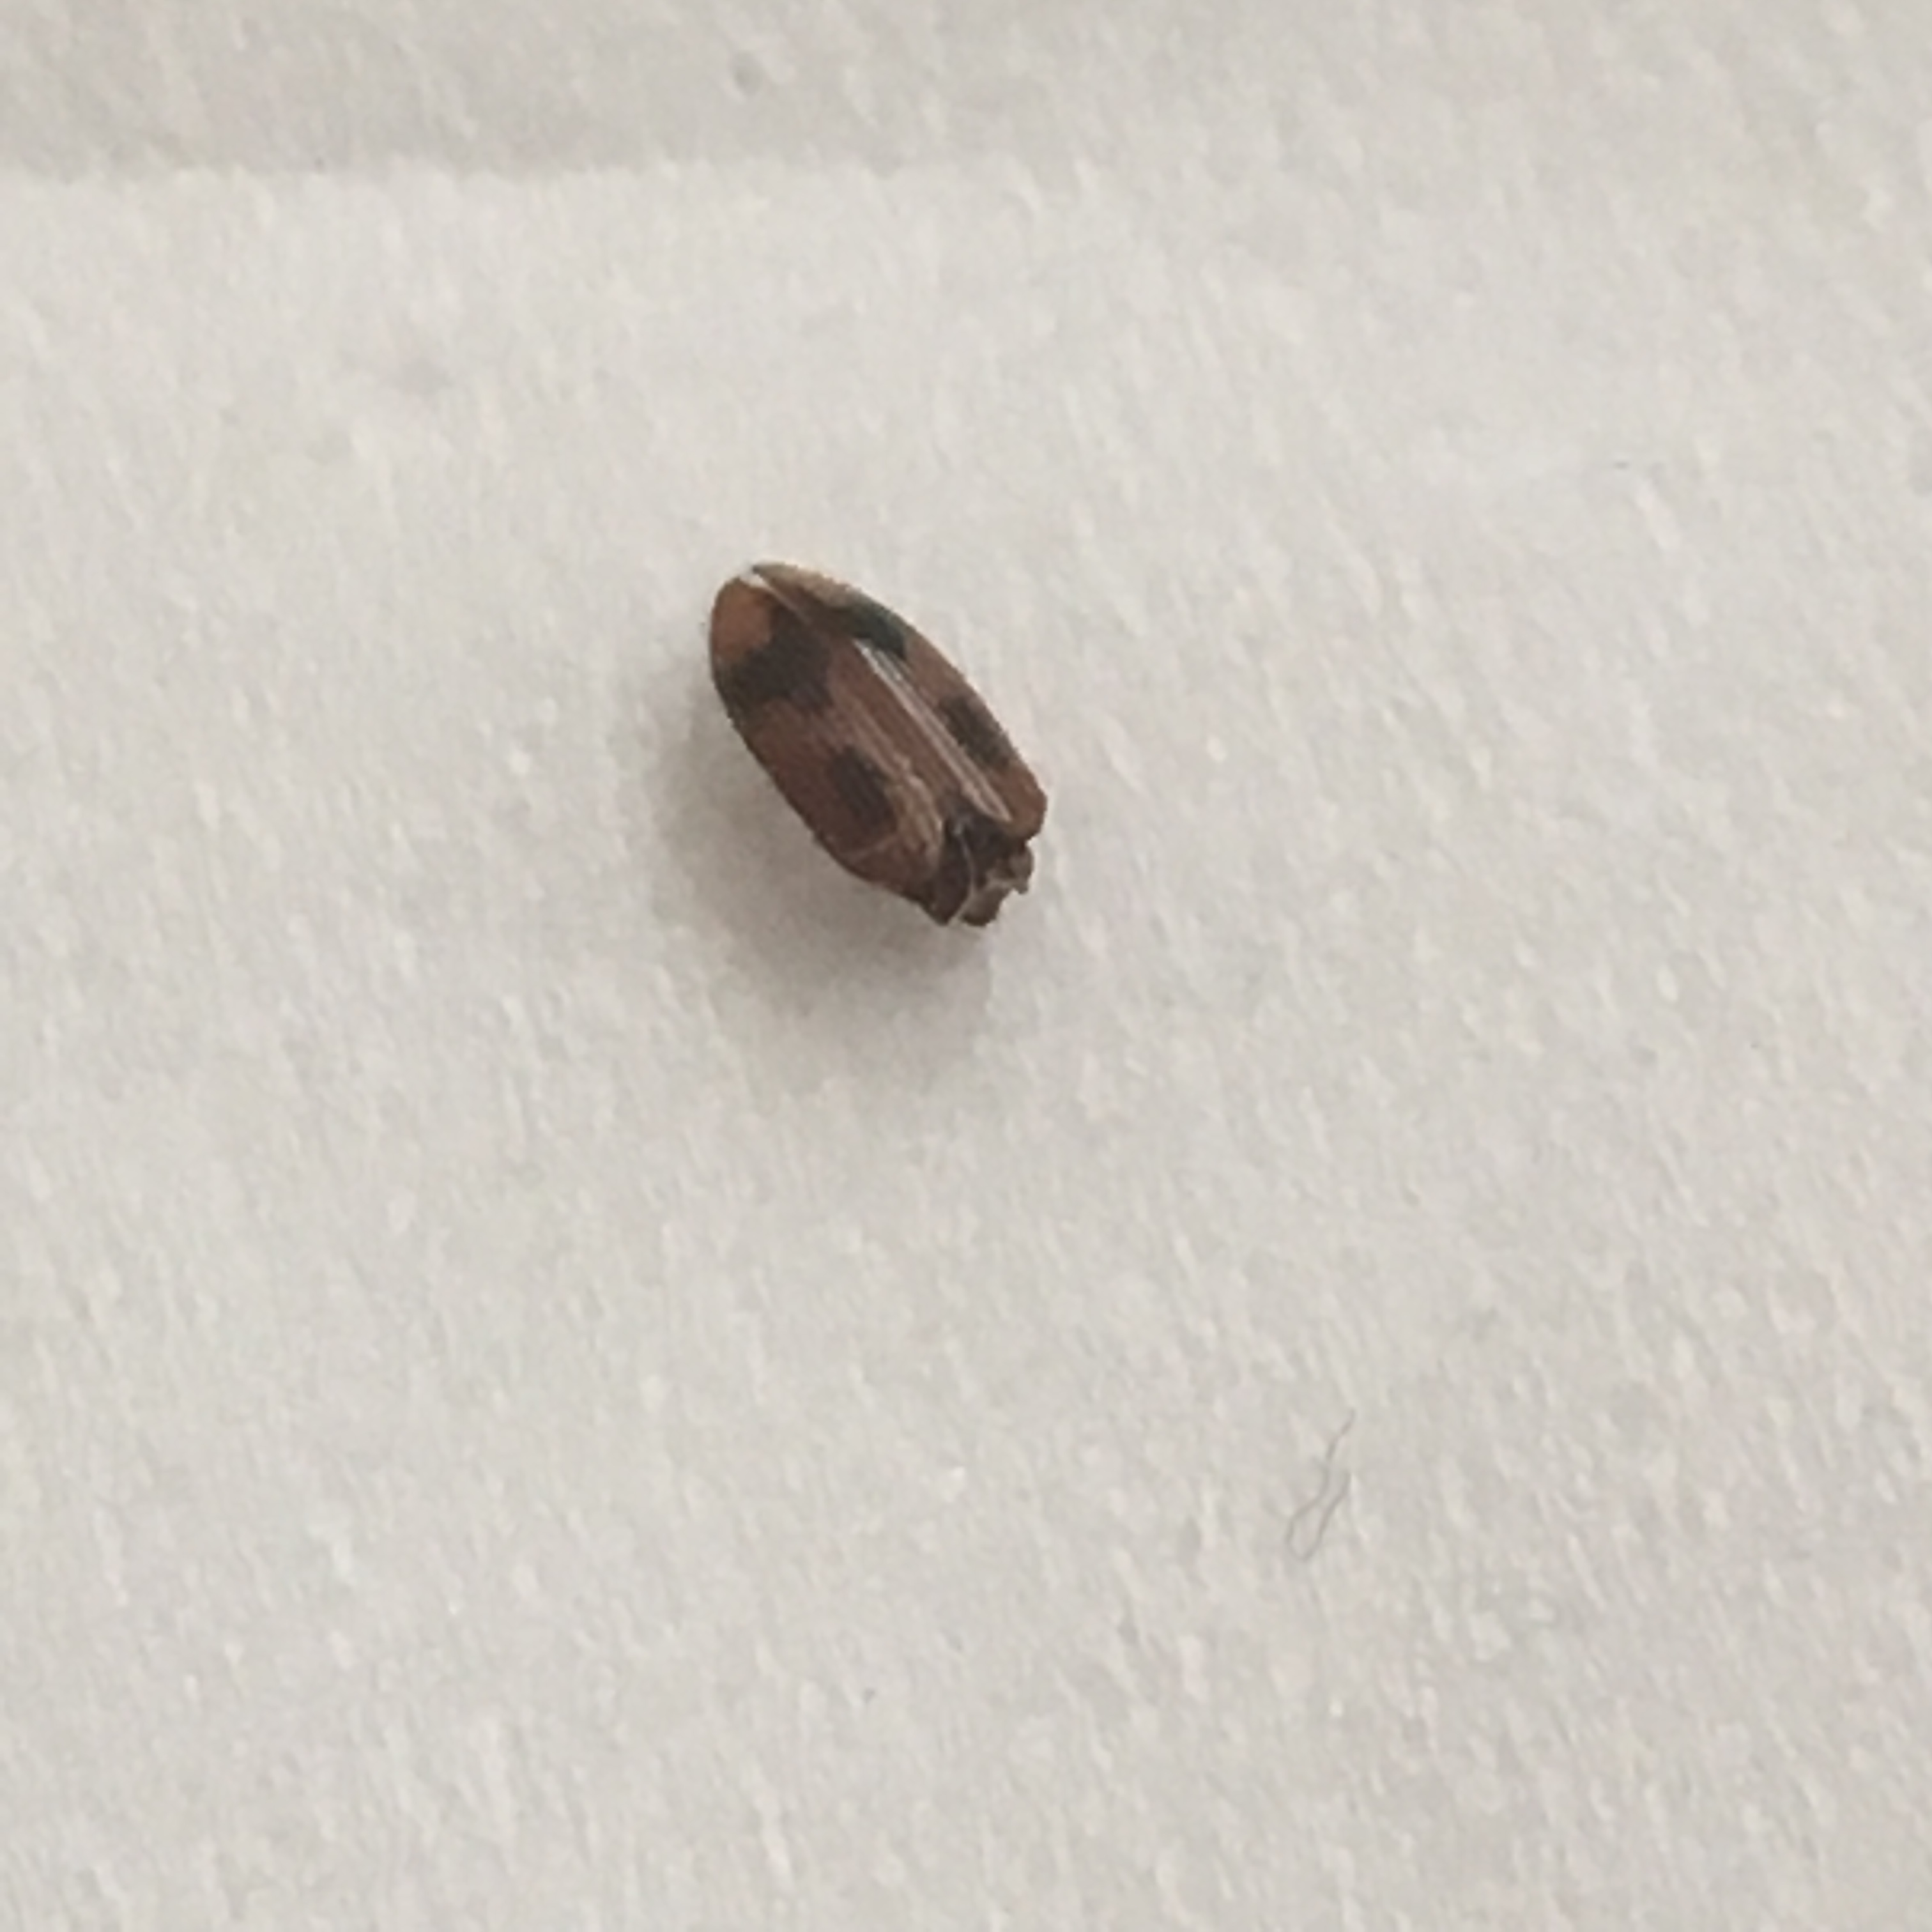 Little brown bug in hair #295837 - Ask Extension